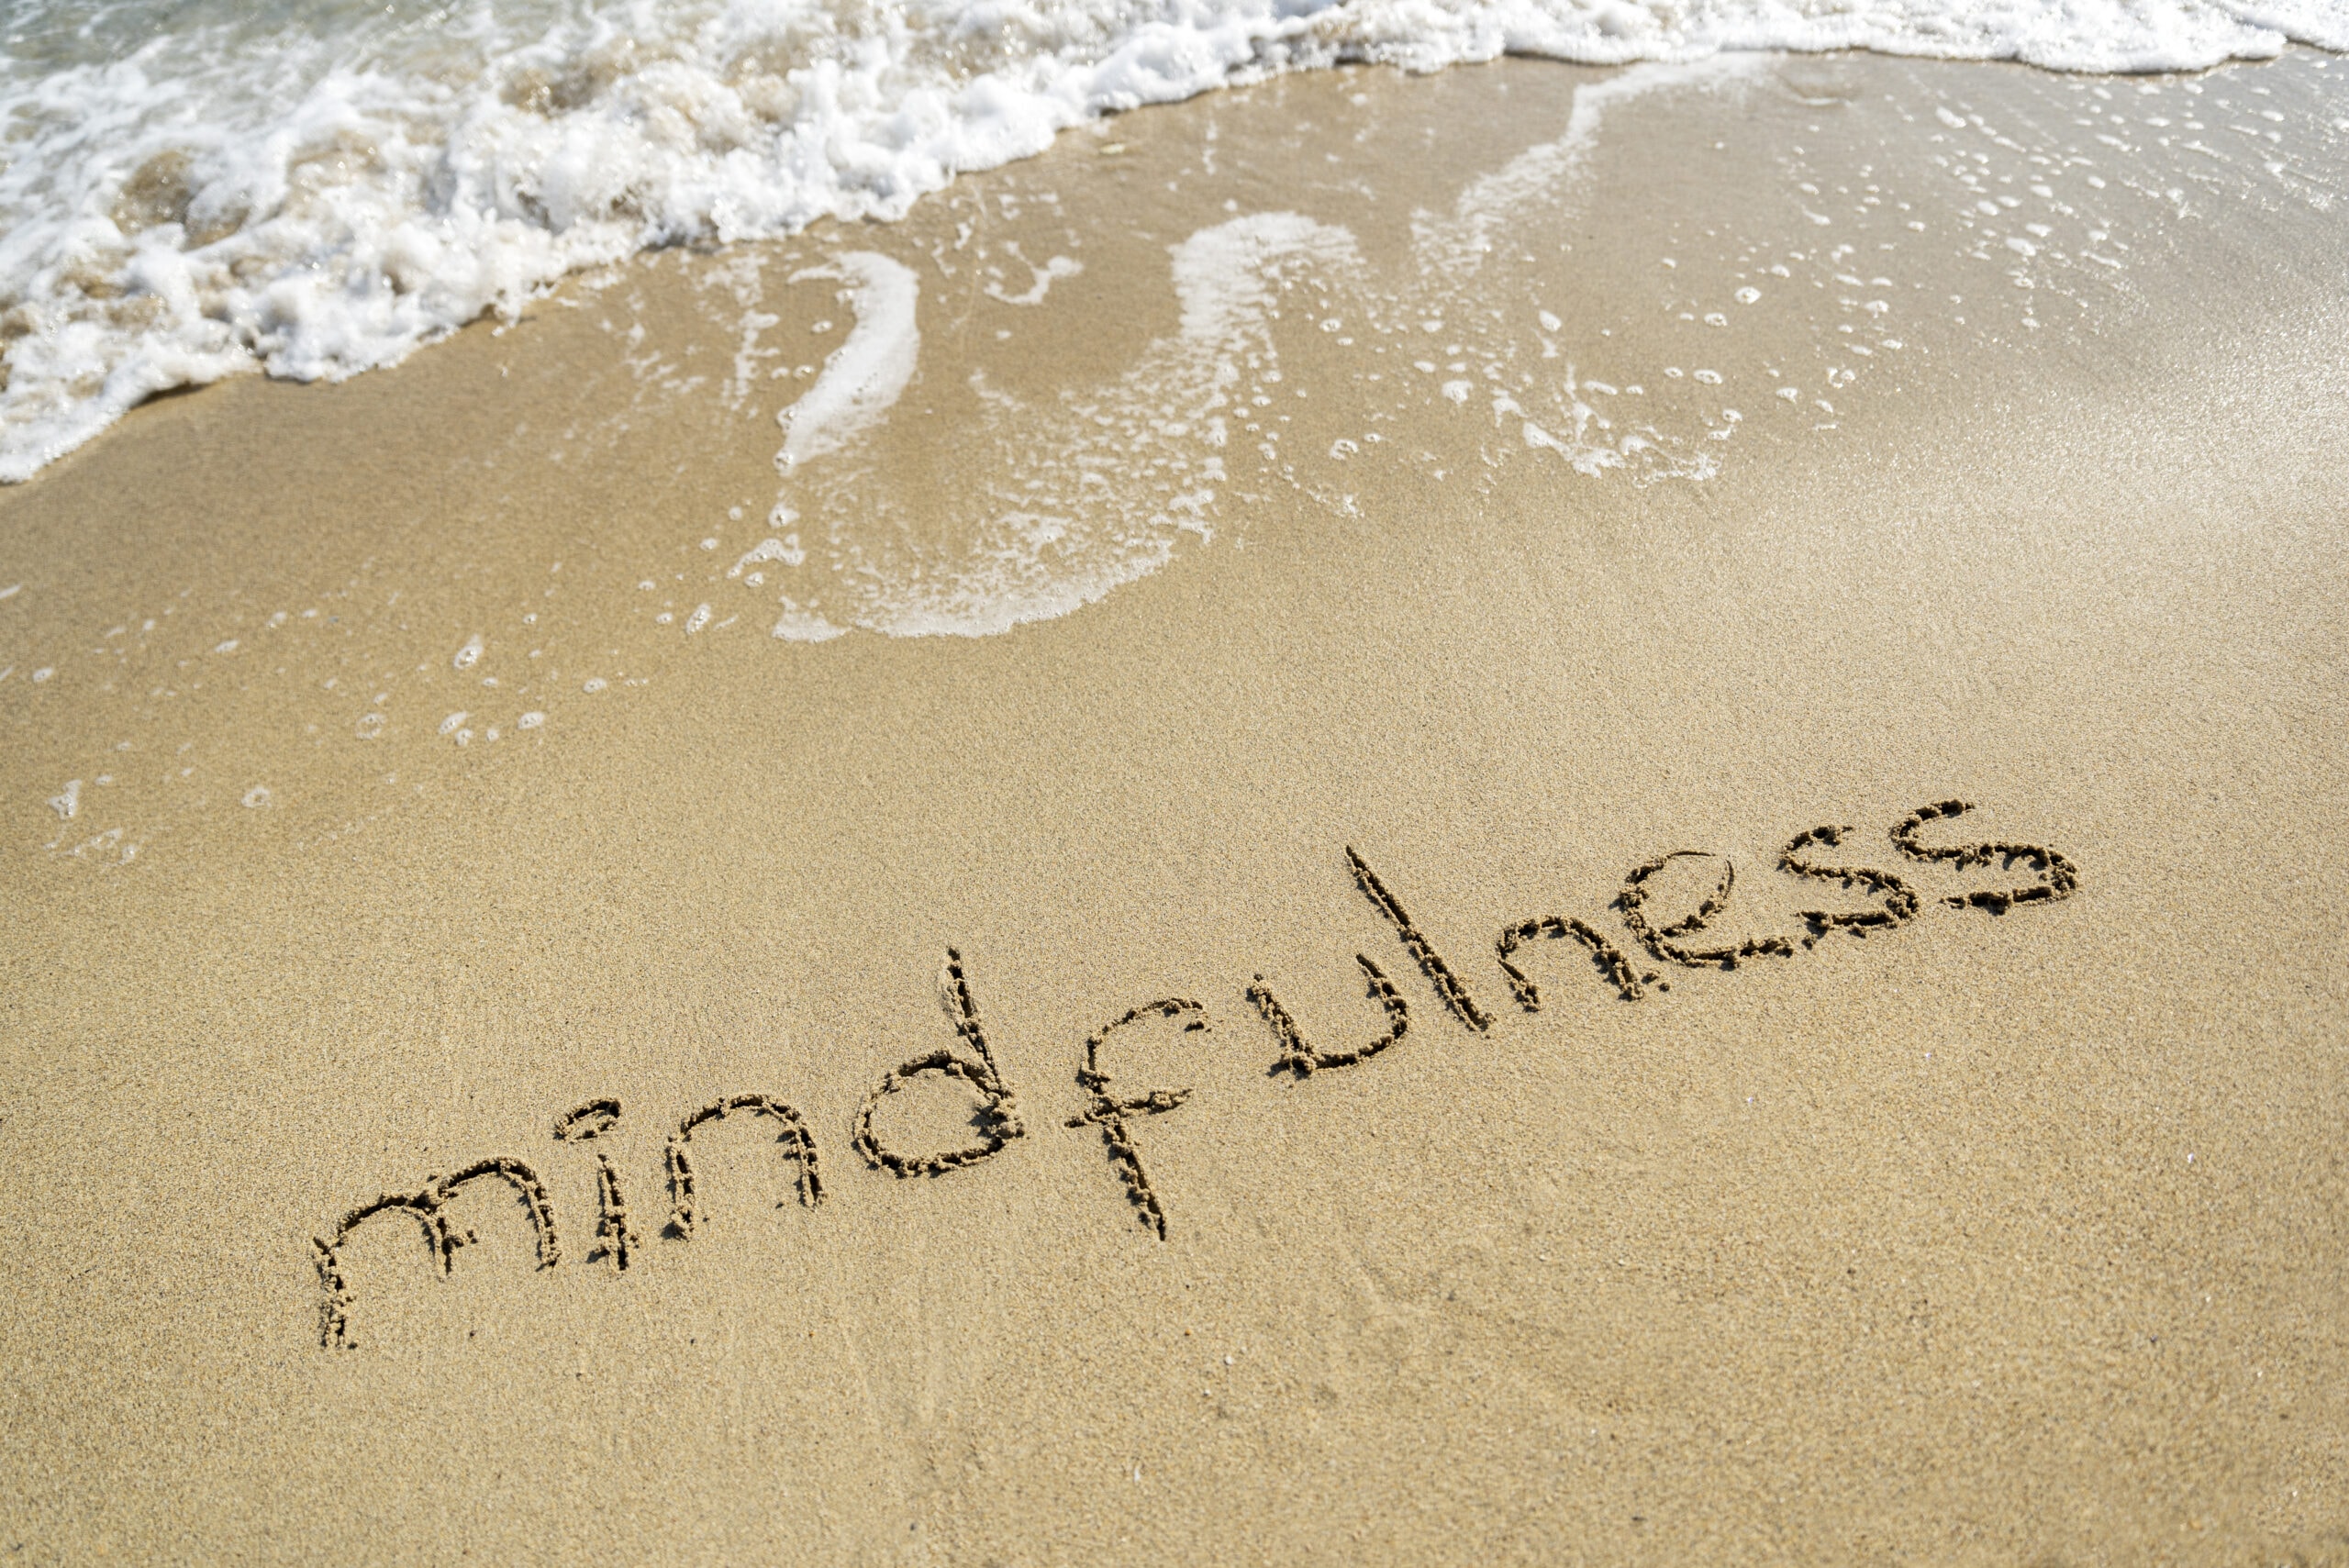 UAMS is offering a Mindfulness-Based Stress Reduction (MBSR) Program online starting March 2.